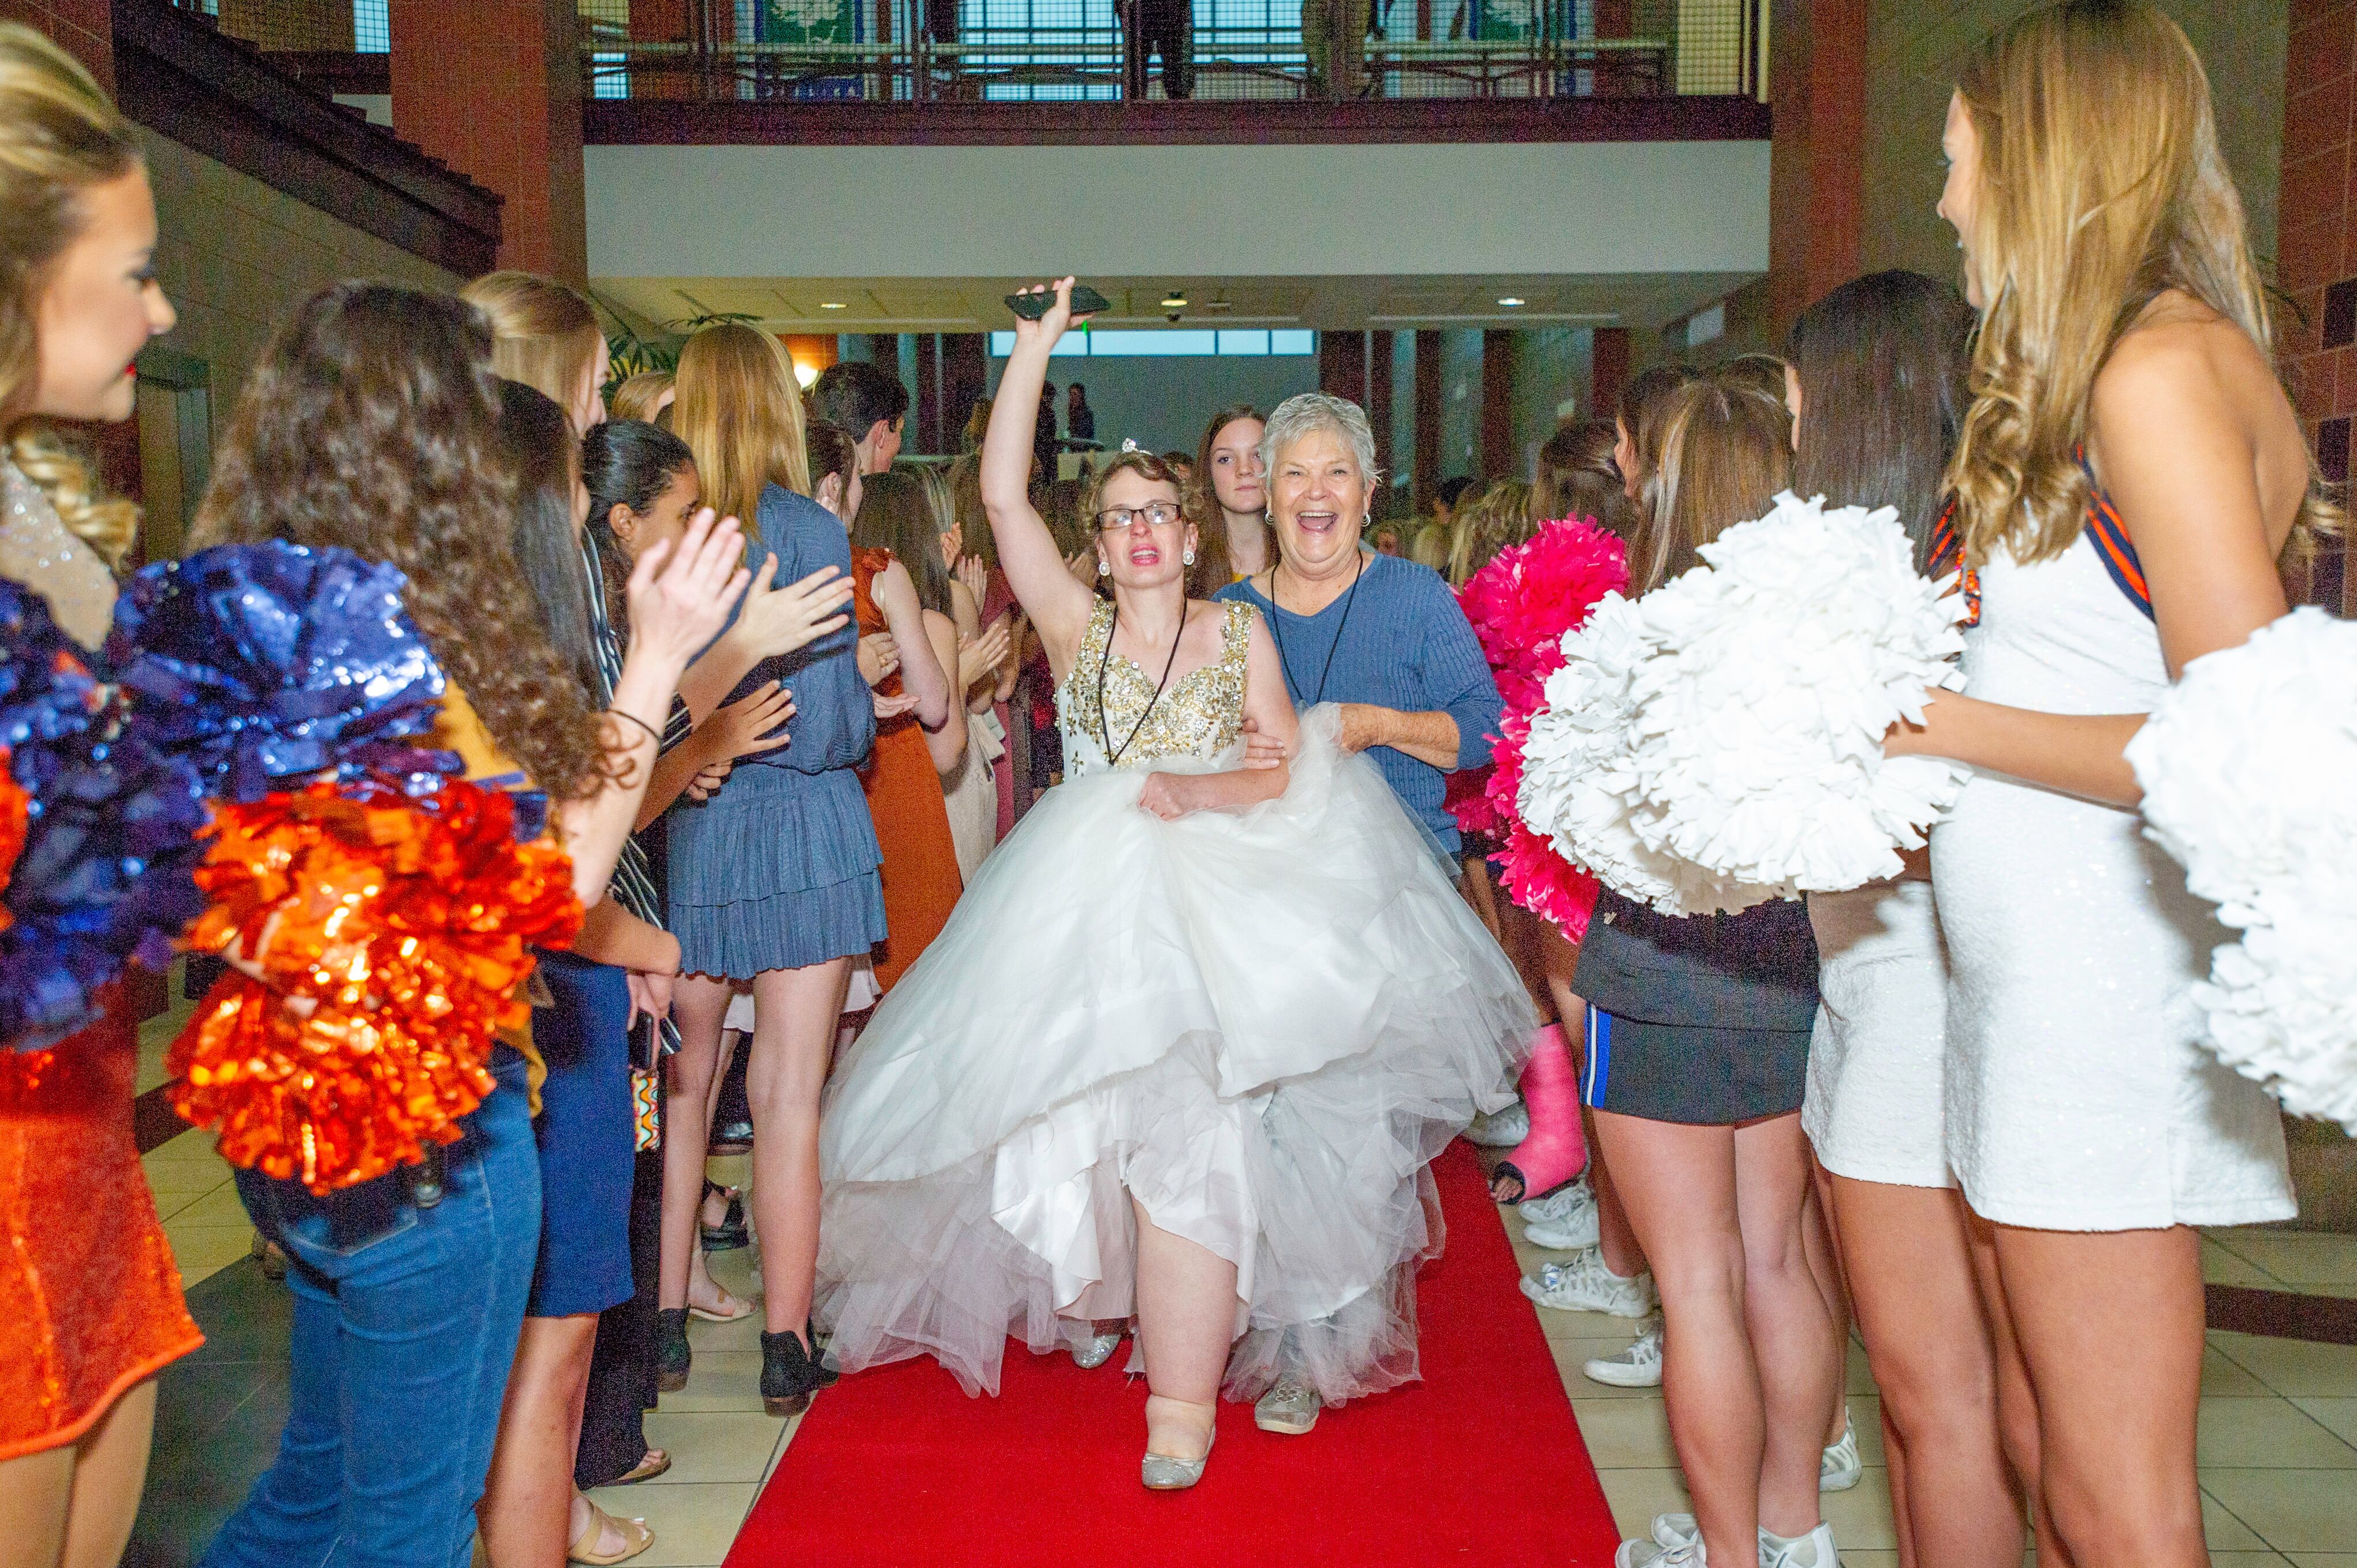 Highlights from the 2019 Shine Prom at the Opelika SportsPlex